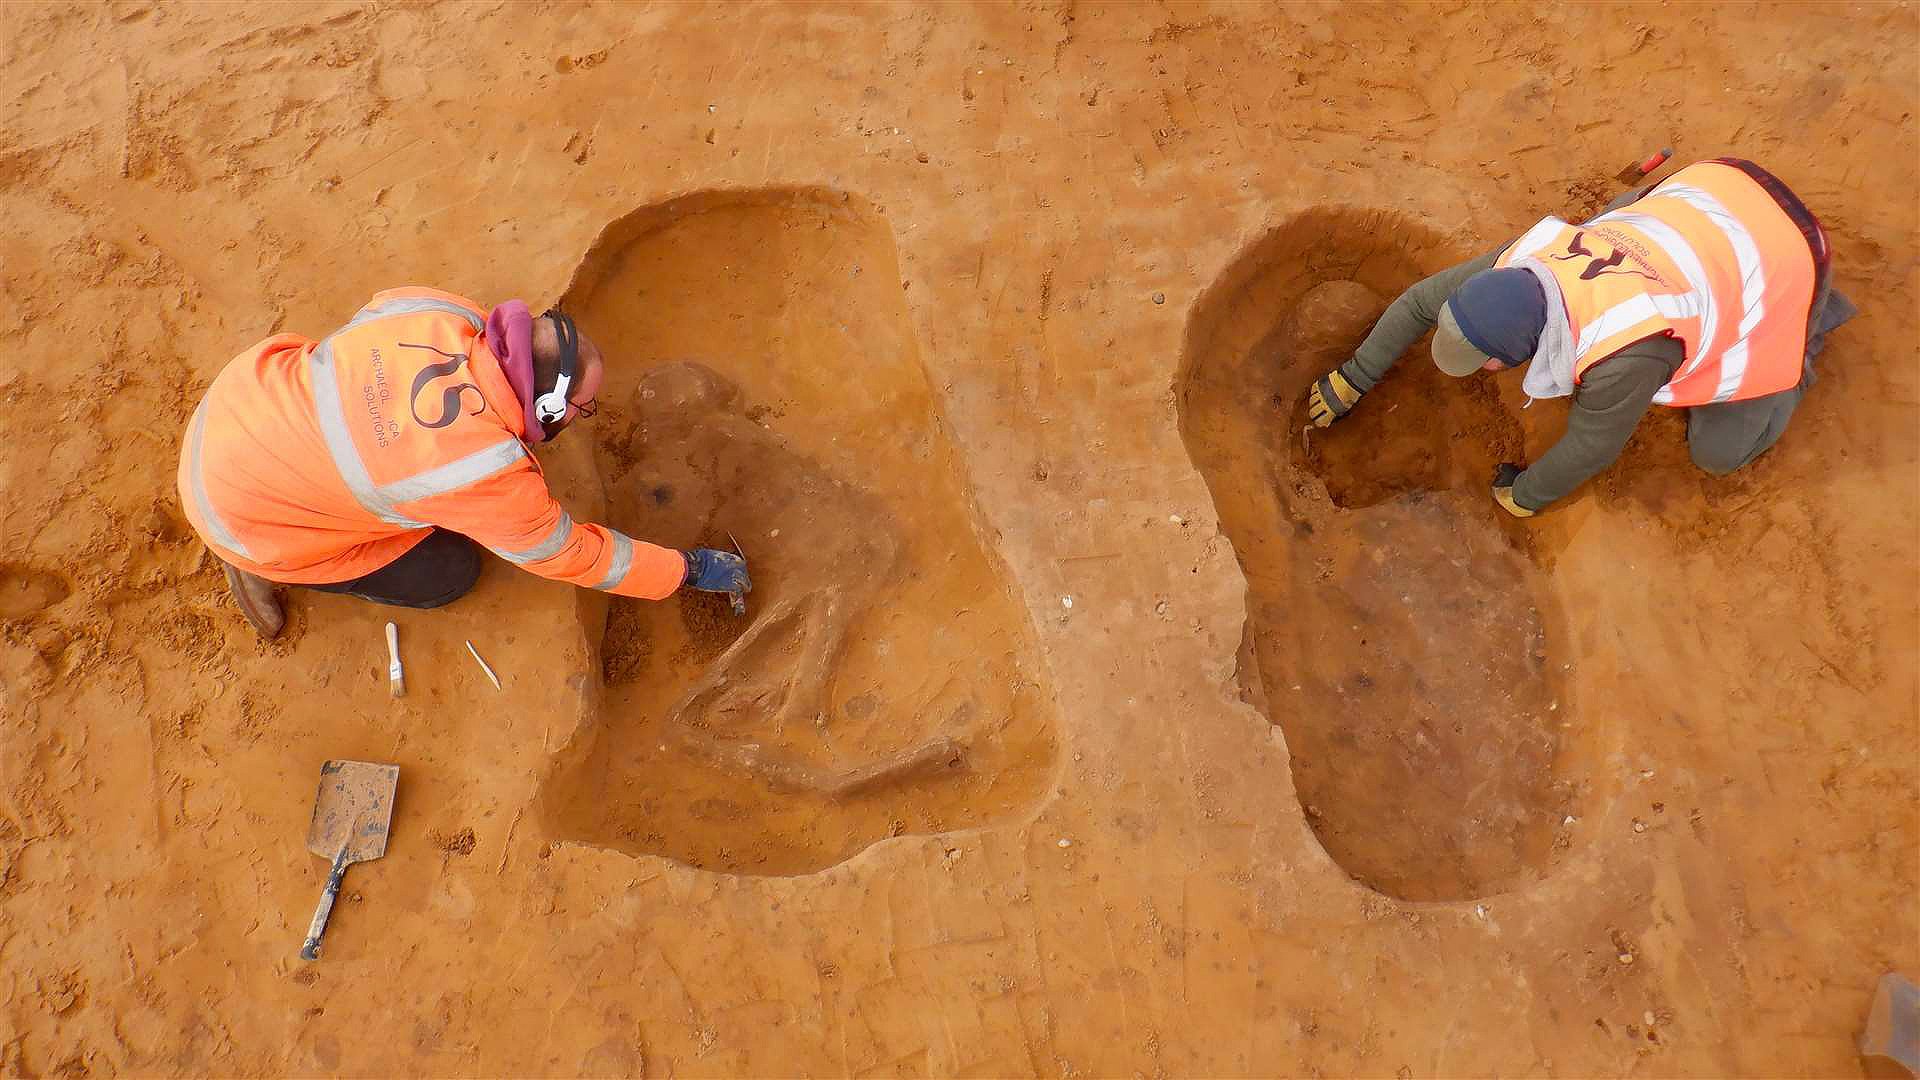 An aerial photo of two workers excavating two Anglo-Saxon graves in a red dirt area. The workers are wearing orange vests and hard hats, and there is a shovel and a pickaxe next to one of the graves.